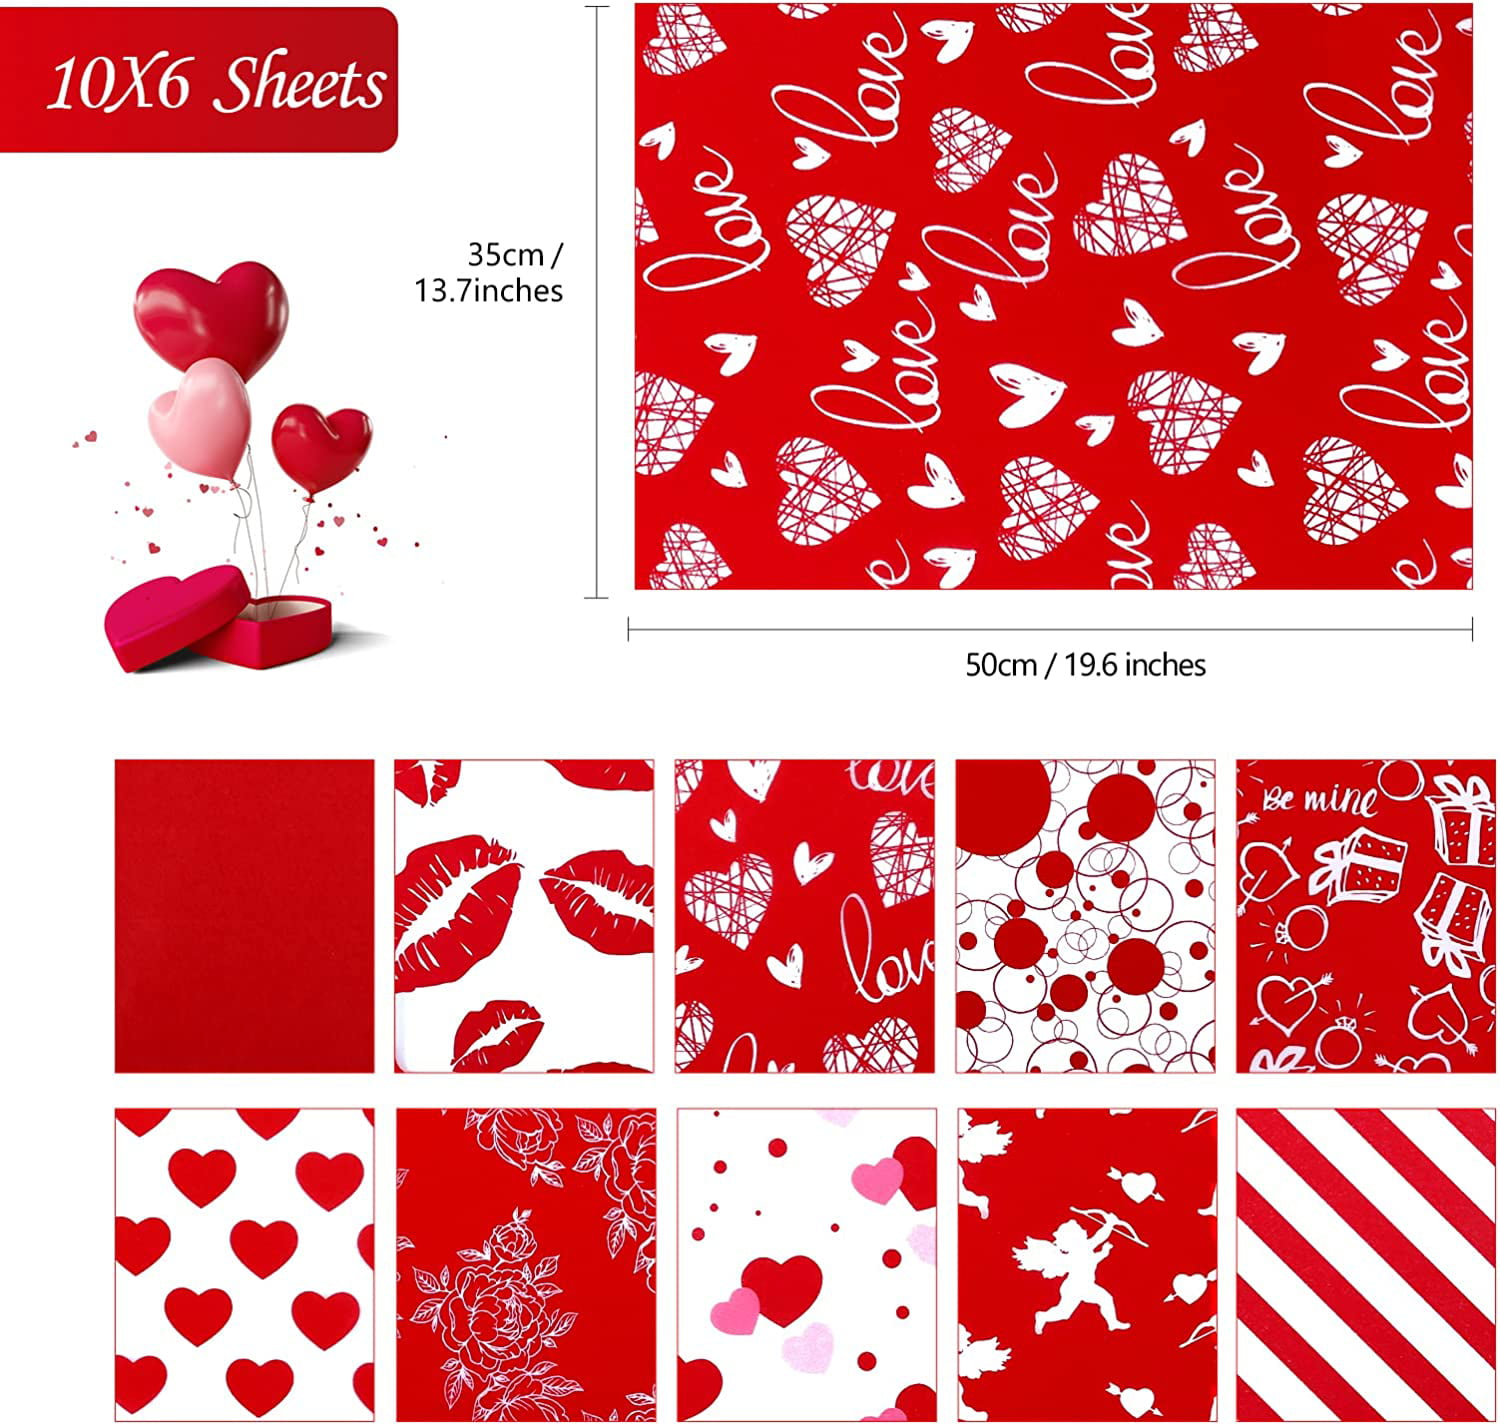 Kavoc 60 Sheets Huge Size Valentines Day Tissue Bulk, 20 x 30 inch Hot Pink  Rose Red Love Heart Cupid Tissue Paper for Gift Wrapping, Gift Bags